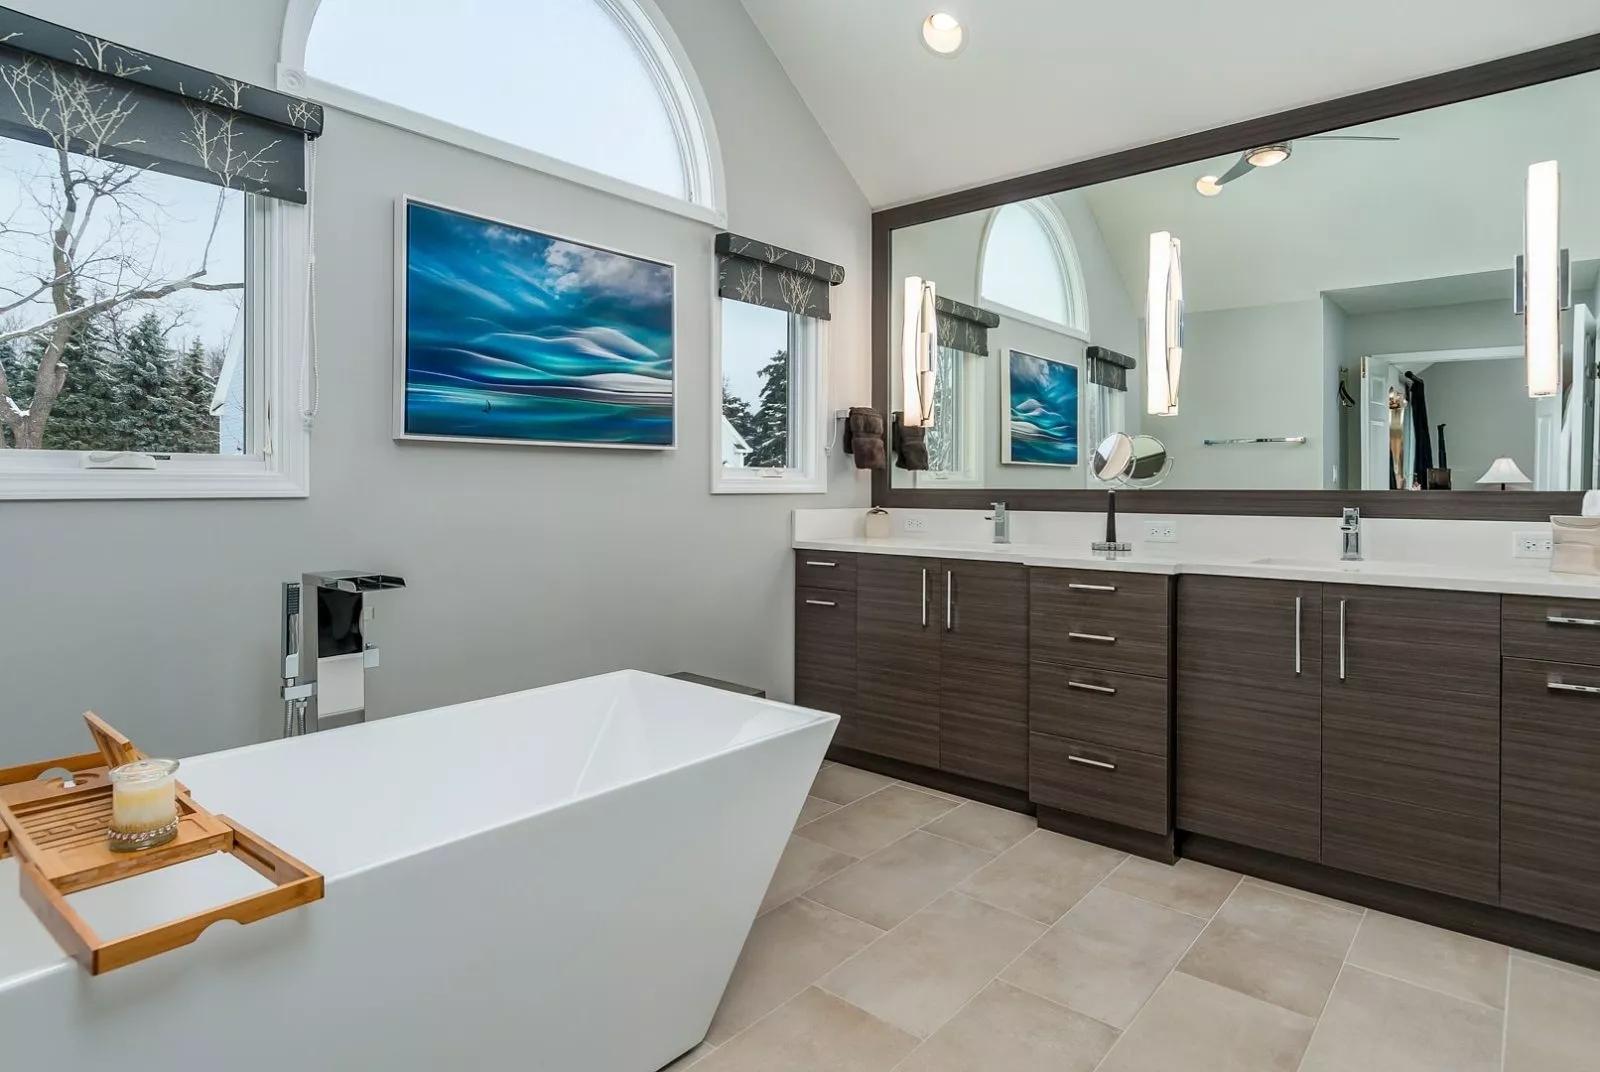 Bathroom grey grained cabinets large garden tub white countertop large vanity mirror vaulted ceiling